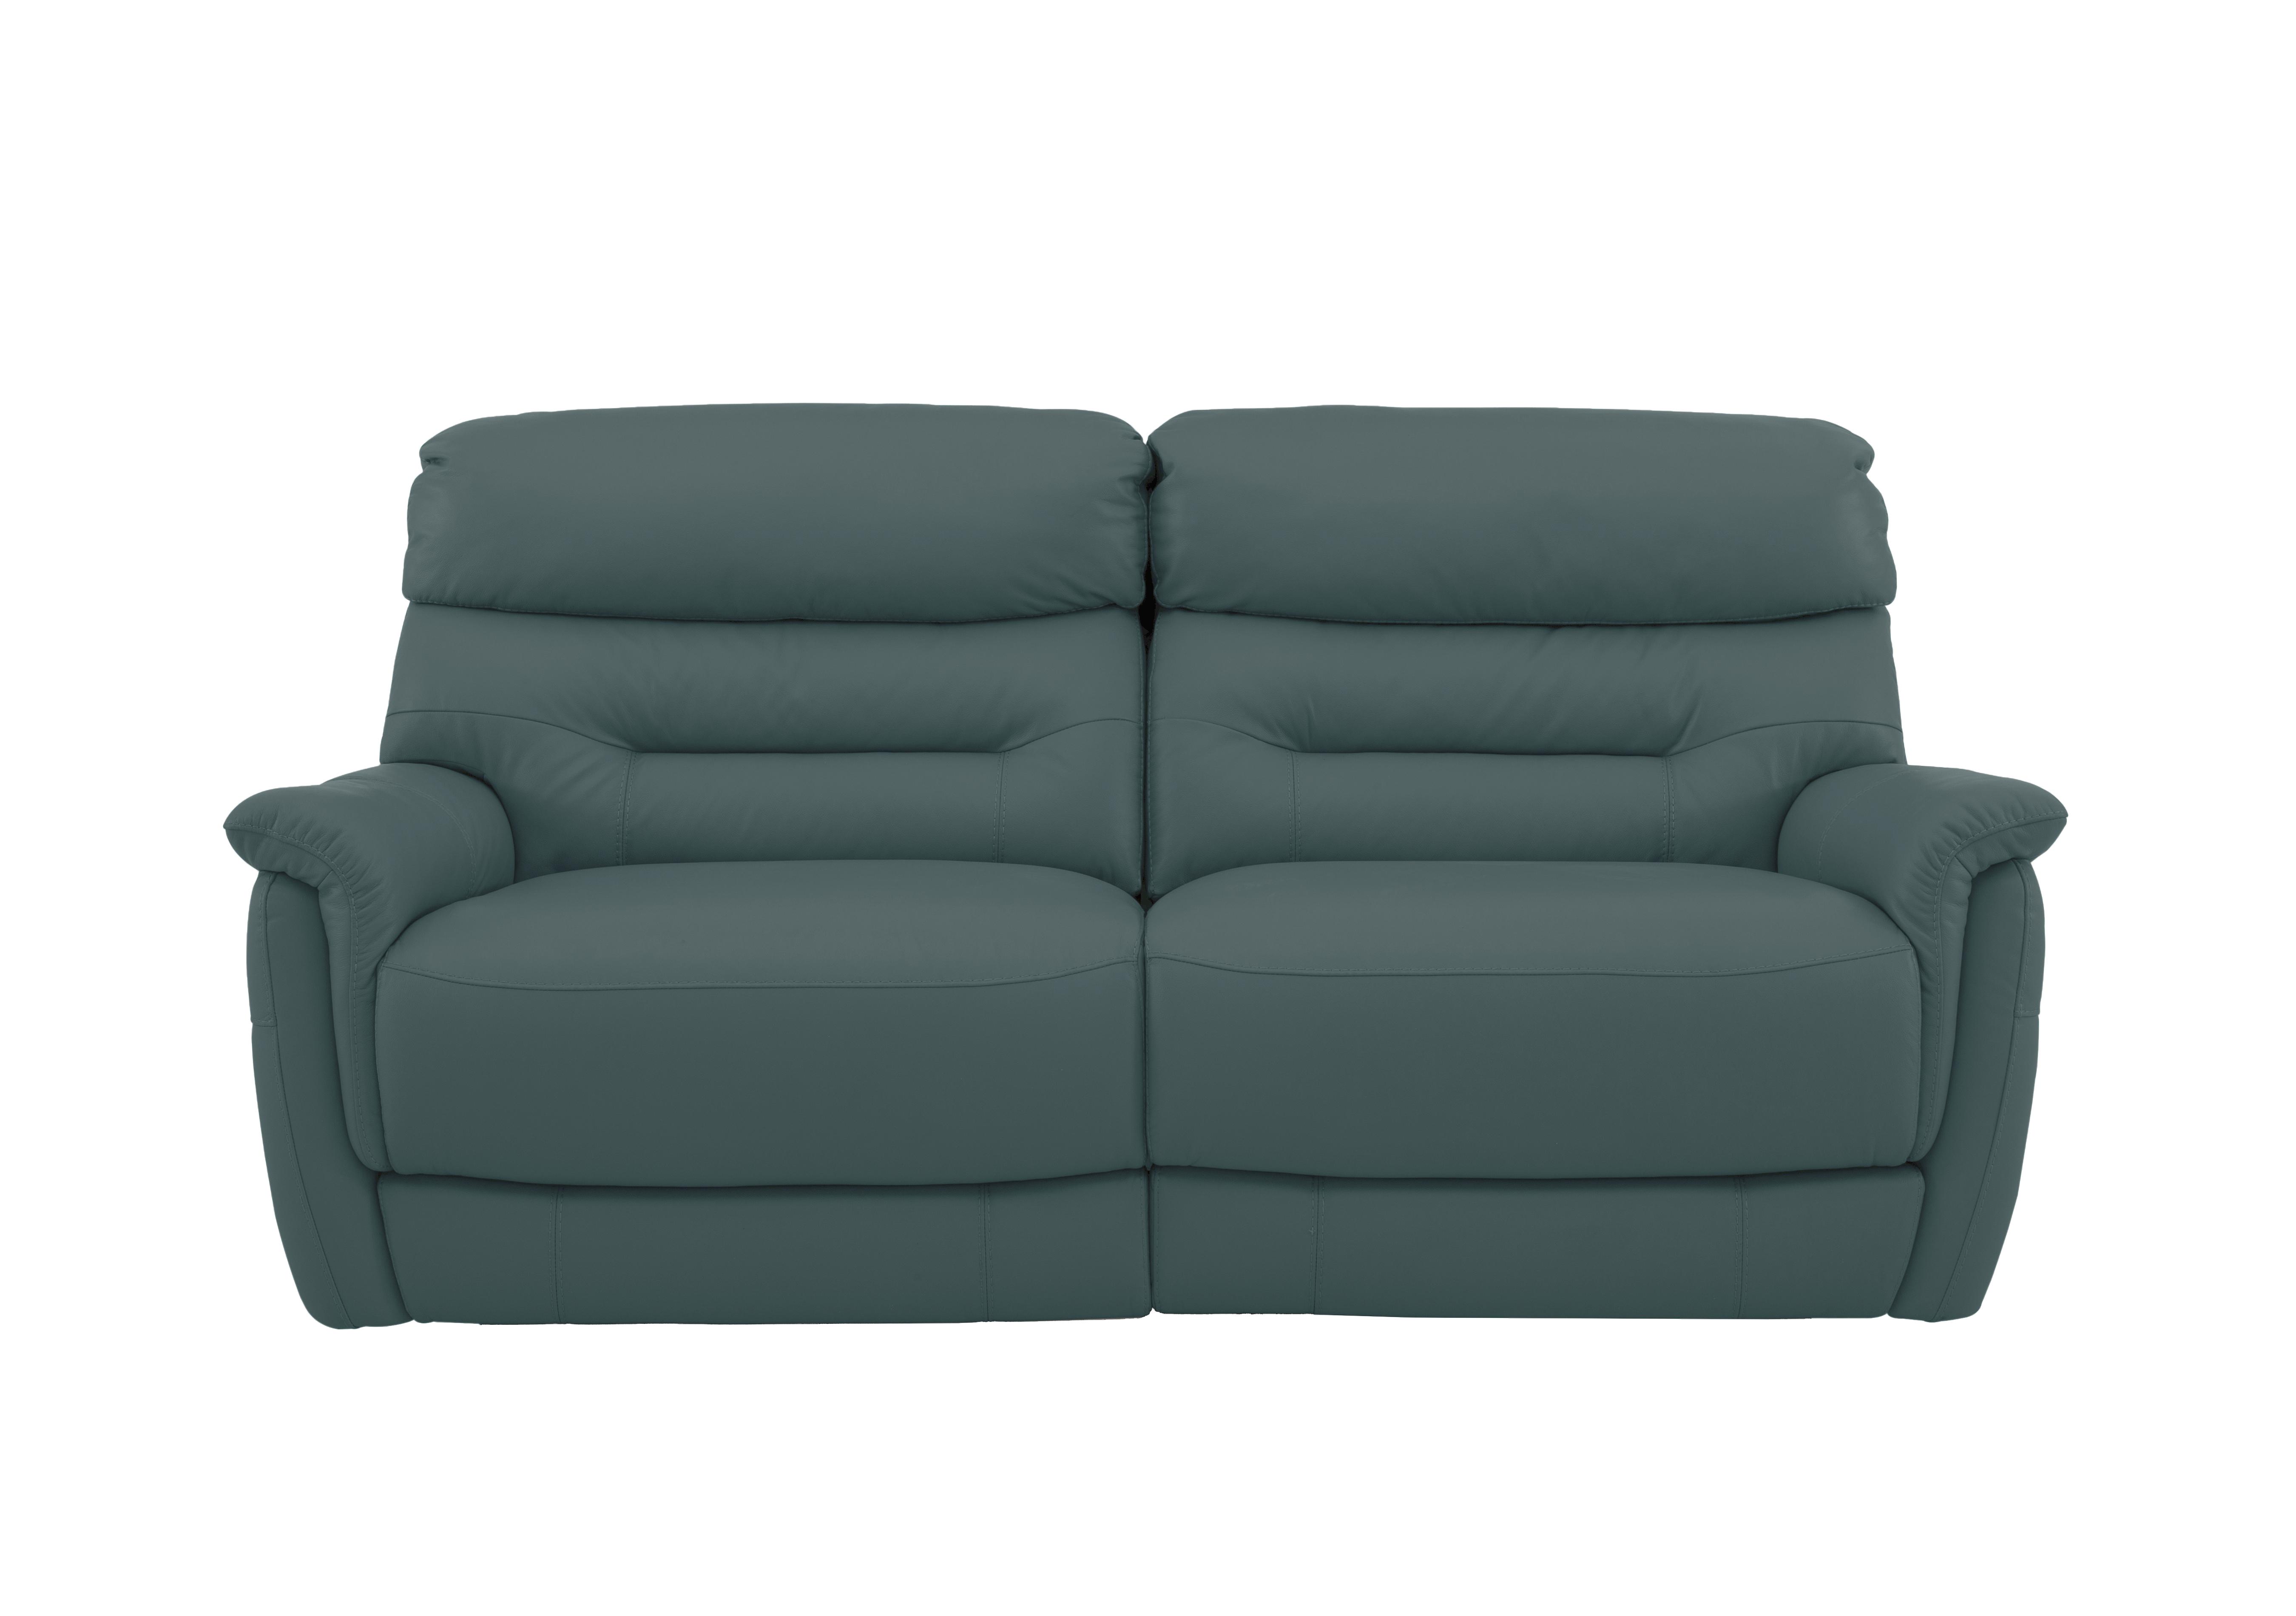 Chicago 3 Seater Leather Sofa in Bv-301e Lake Green on Furniture Village